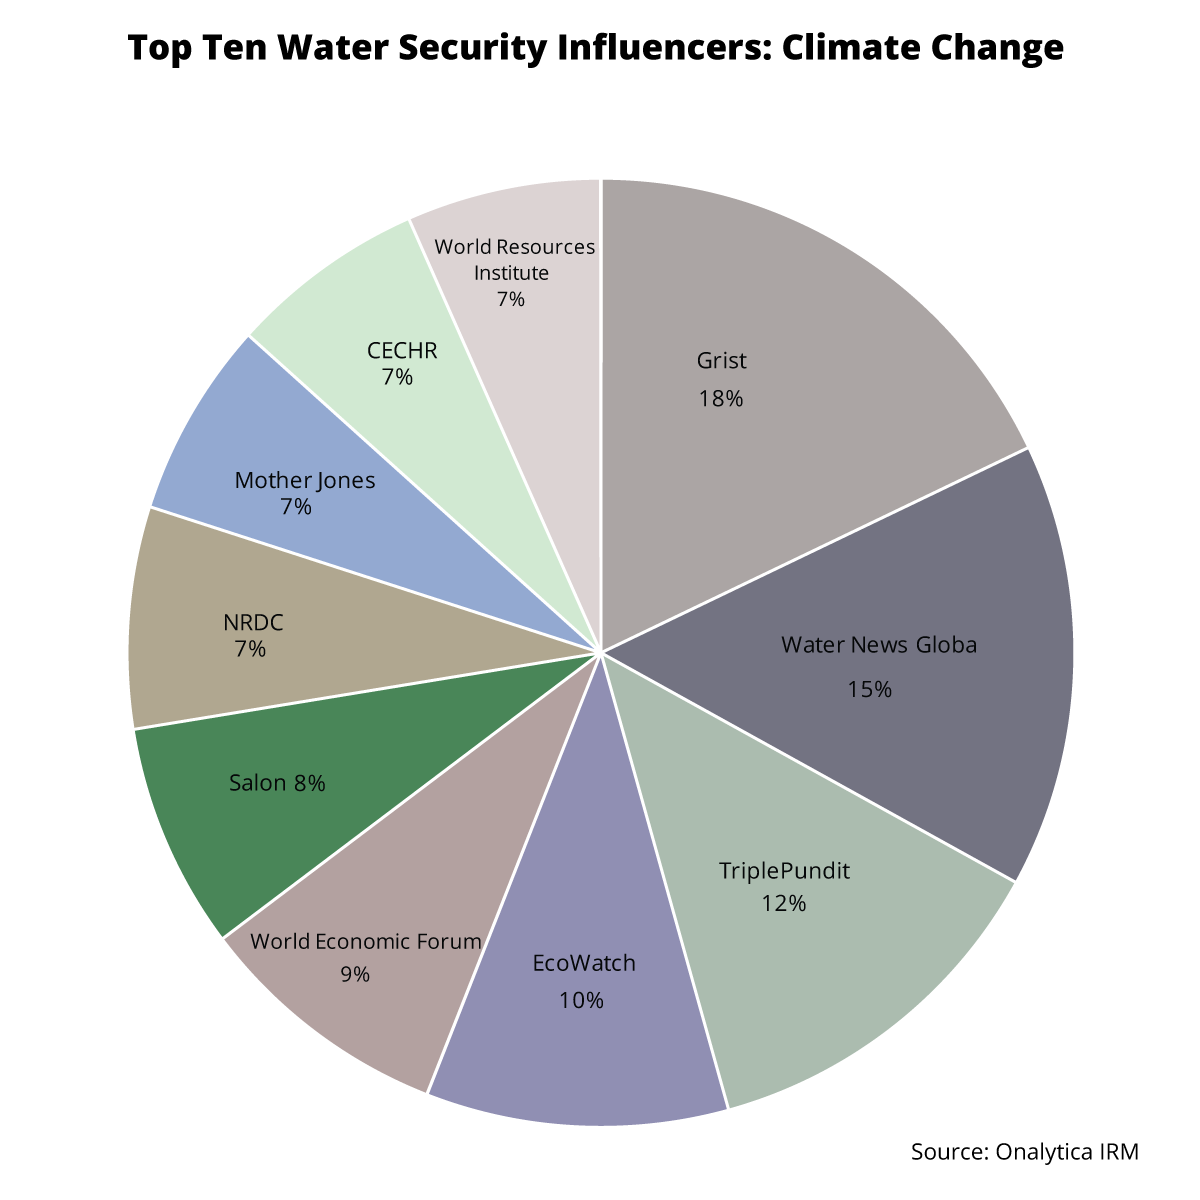 Top Ten Water Security Influencers Discussing Climate Change: Individuals and Brands